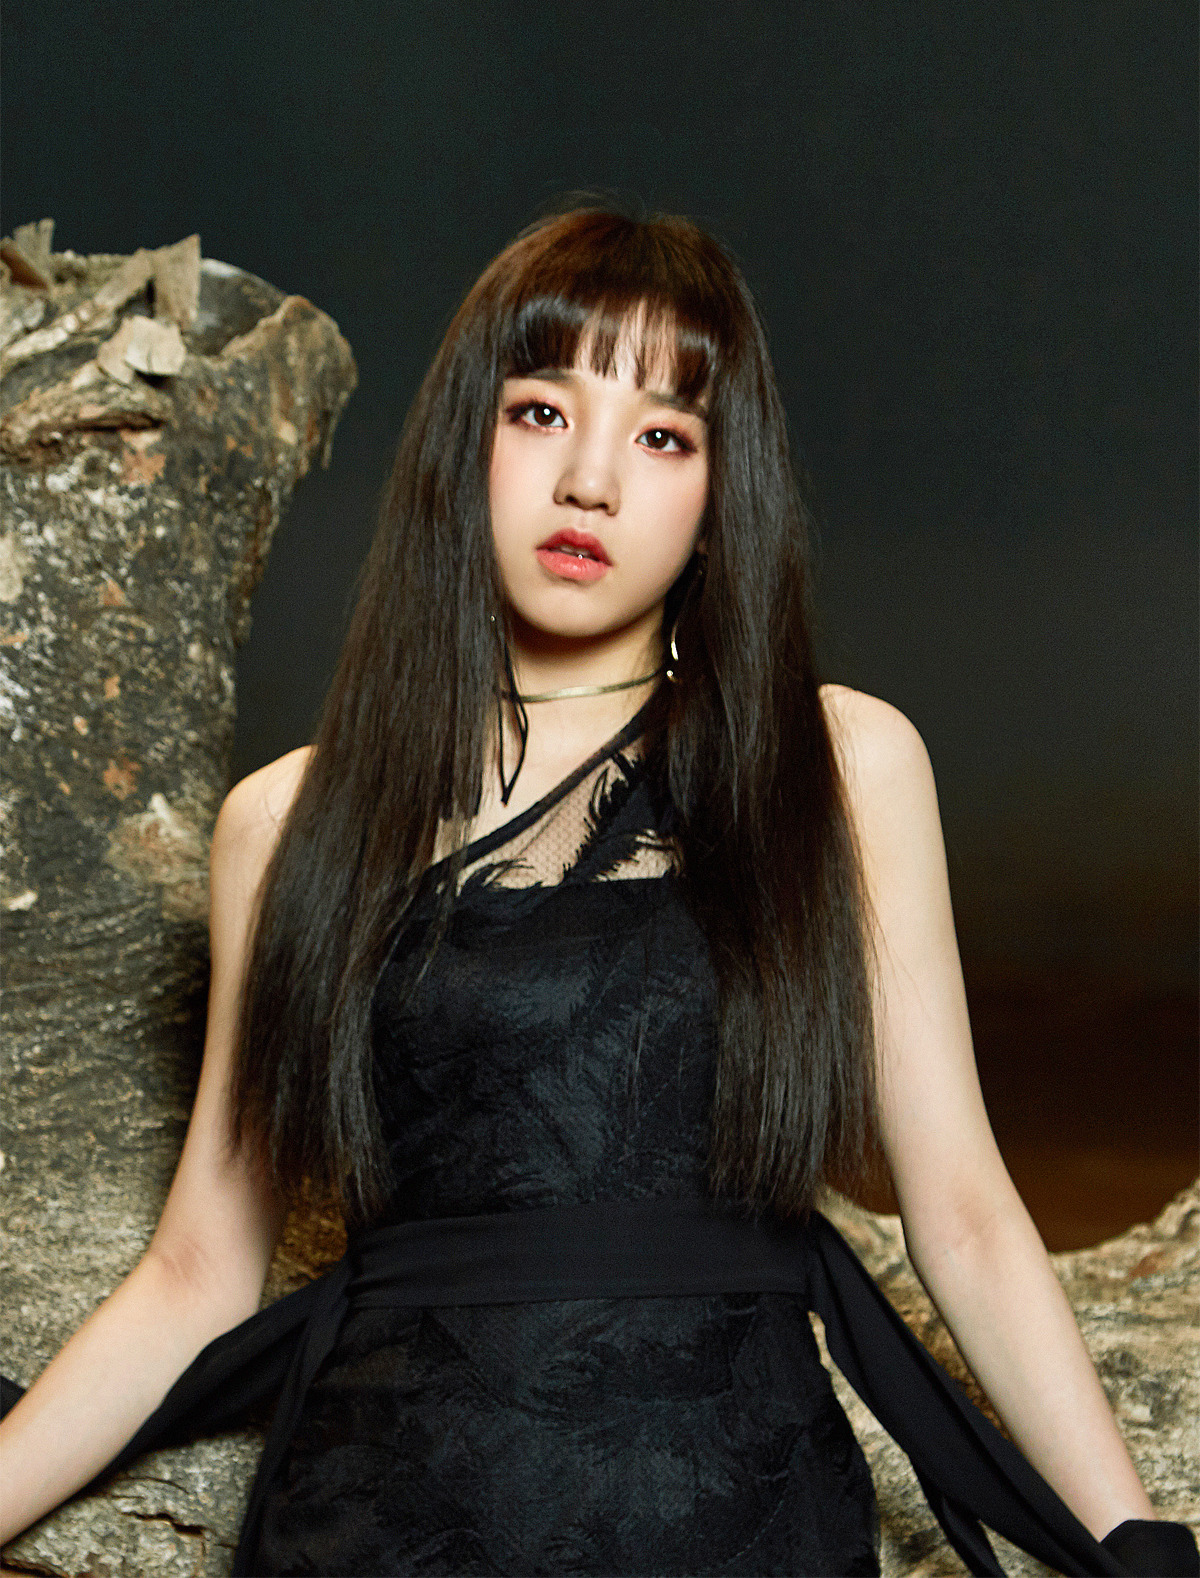 Seoul = = Song Yuqi, a member of the group (girls) children, joins the China edition Running Man Run ().On the 11th, China Storage Satellite TV Run released members who joined the new season through official Wei Bo.In Run season 7, Song Yuqi, Licheon, Angela Baby, Zeng Kai, Juamun, Wang Yim and Lucas are active as fixed members.Song Yuqi made his debut with group (girl) children in May last year, winning six new awards in succession with Lattata (LATATA) and Han (one) and proving to be the best rookie of 2018.Meanwhile, (girl) children belonging to Song Yuqi will release their second mini album I MADE on the 26th and continue their trend.